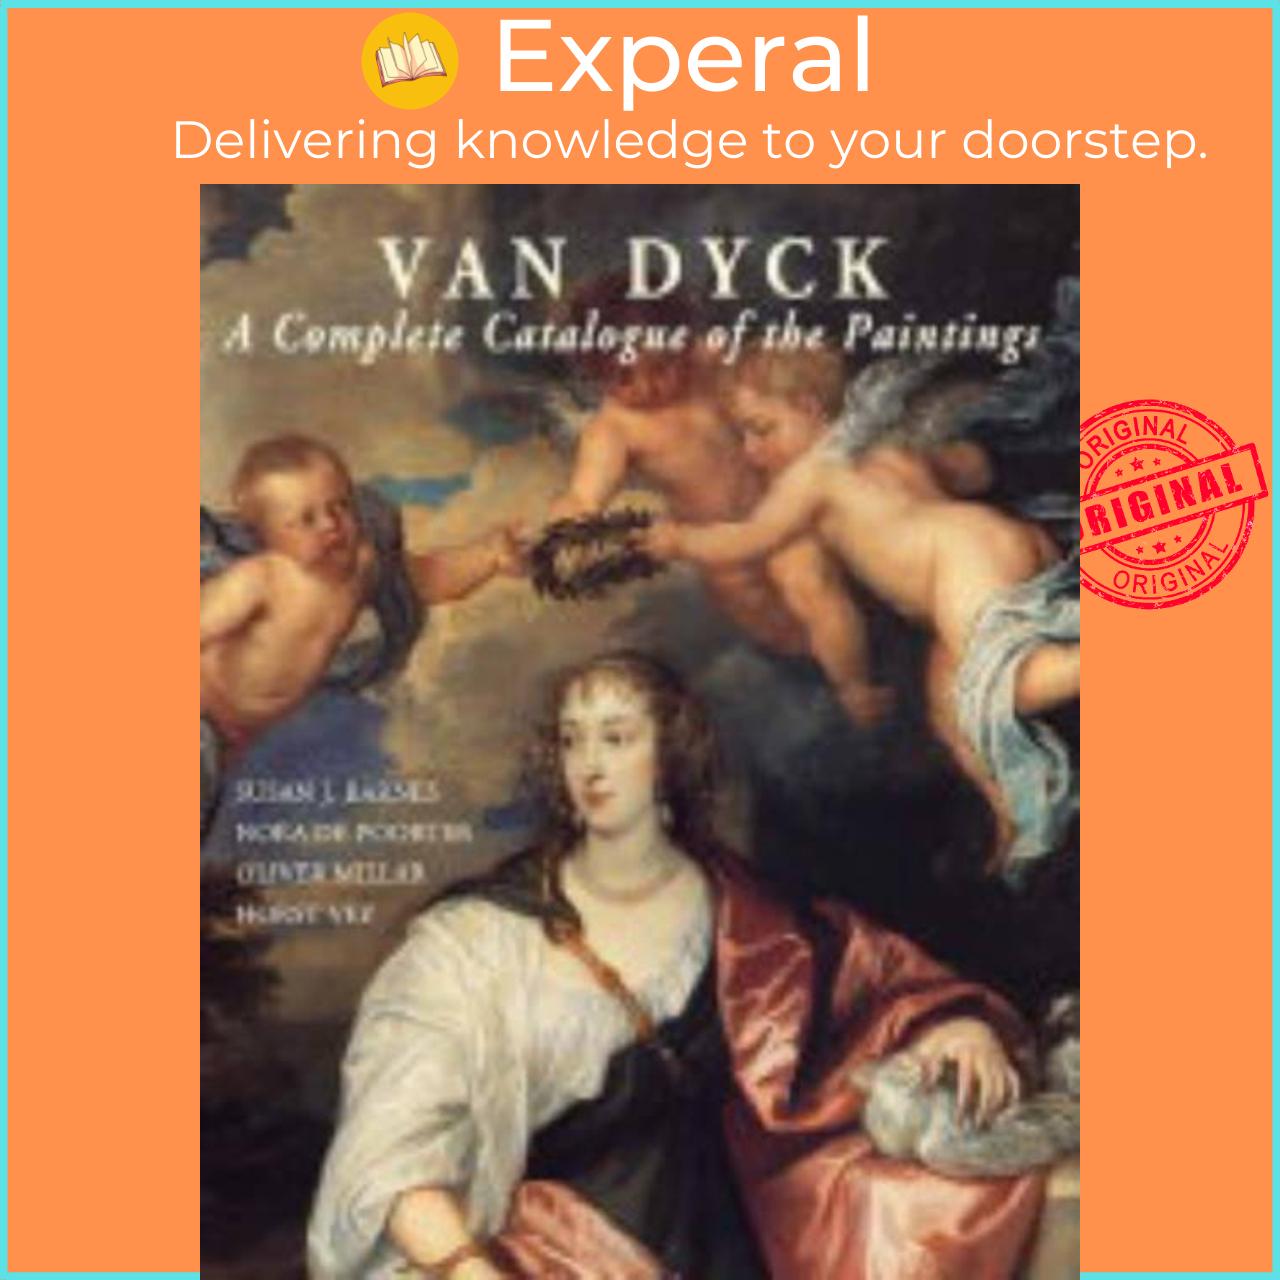 Sách - Van Dyck - A Complete Catalogue of the Paintings by Nora De Poorter (UK edition, hardcover)